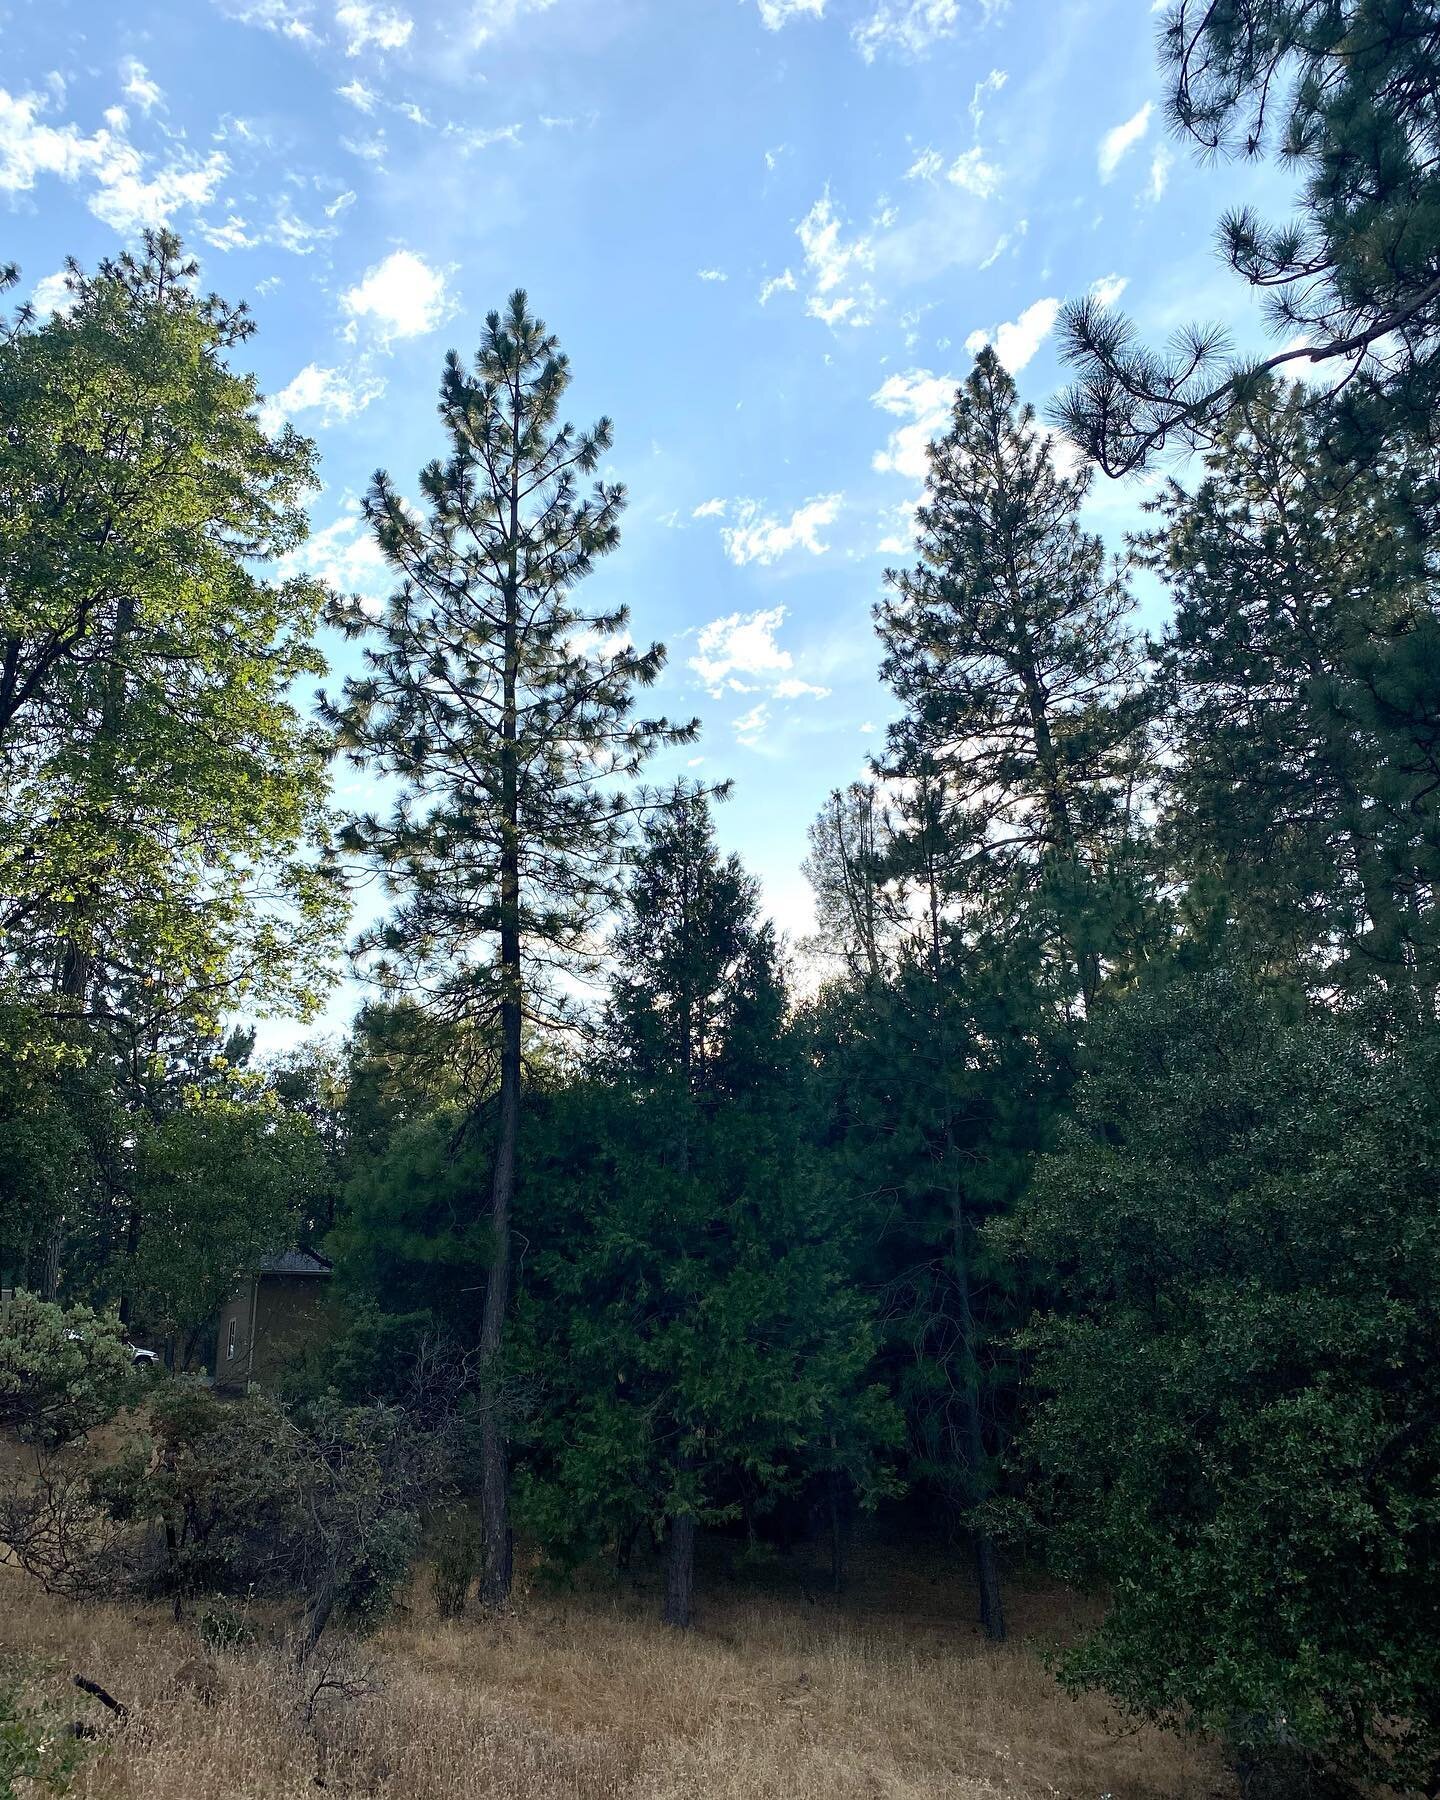 Heading out for an evening hike in @pinemountainlake. So beautiful out here! #hiking #hikecalifornia #grovelandcalifornia #naturestreadmill #freshair #pinetrees